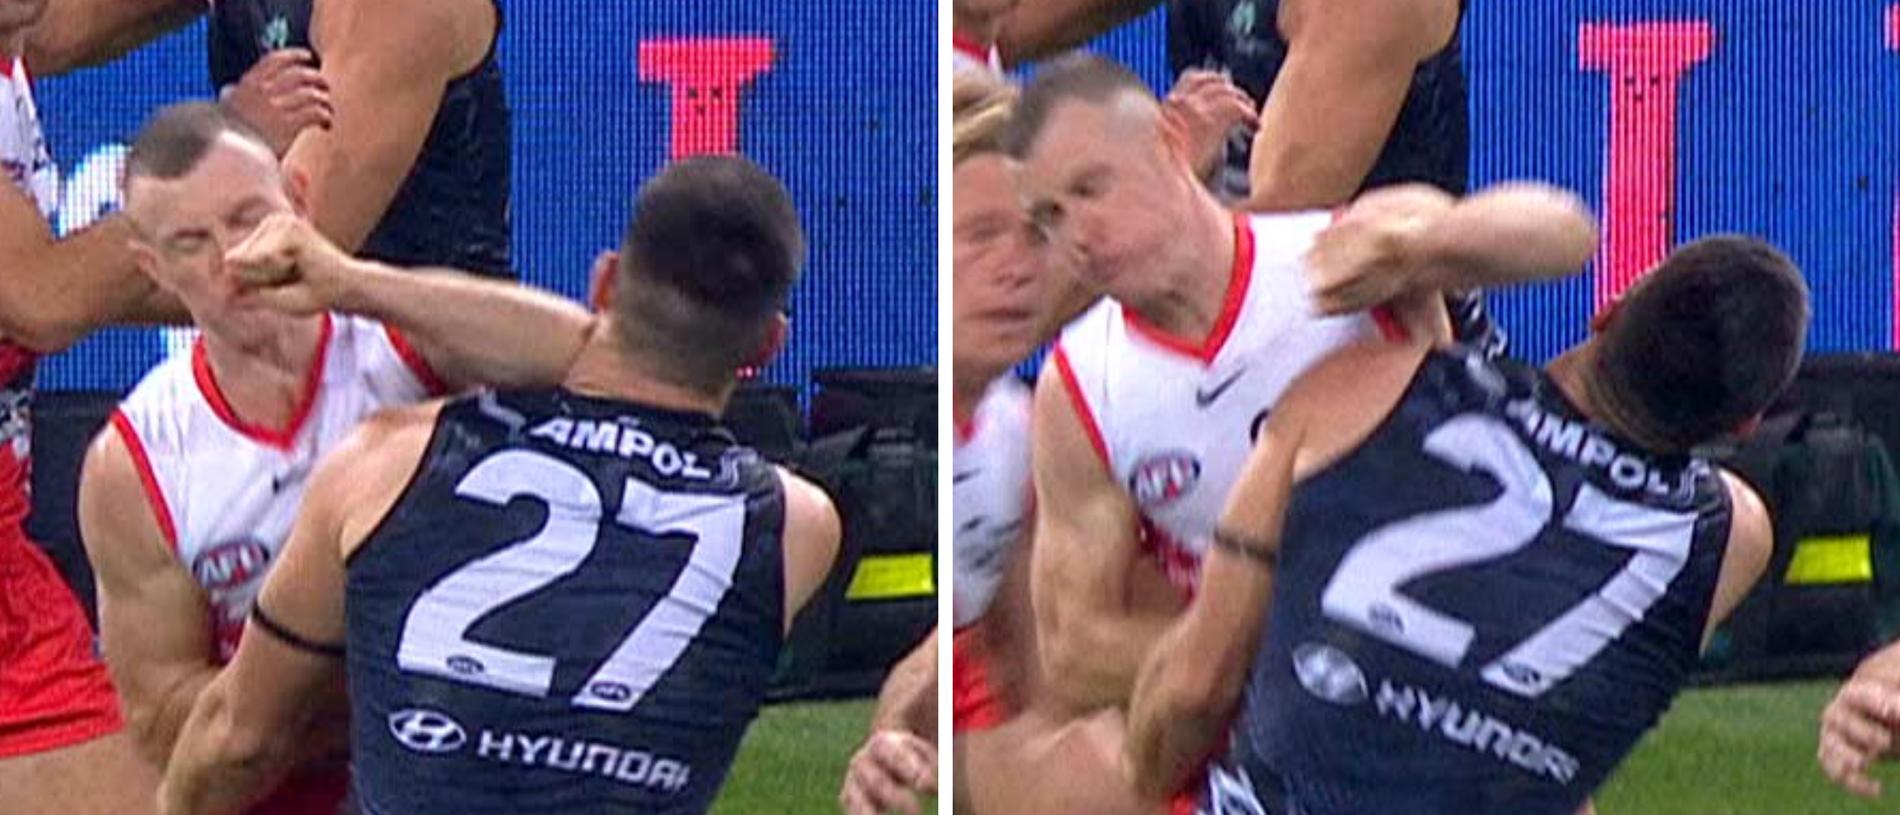 Sydney's Chad Warner could have his Brownlow Medal eligibility come into question after this incident involving Marc Pittonet.